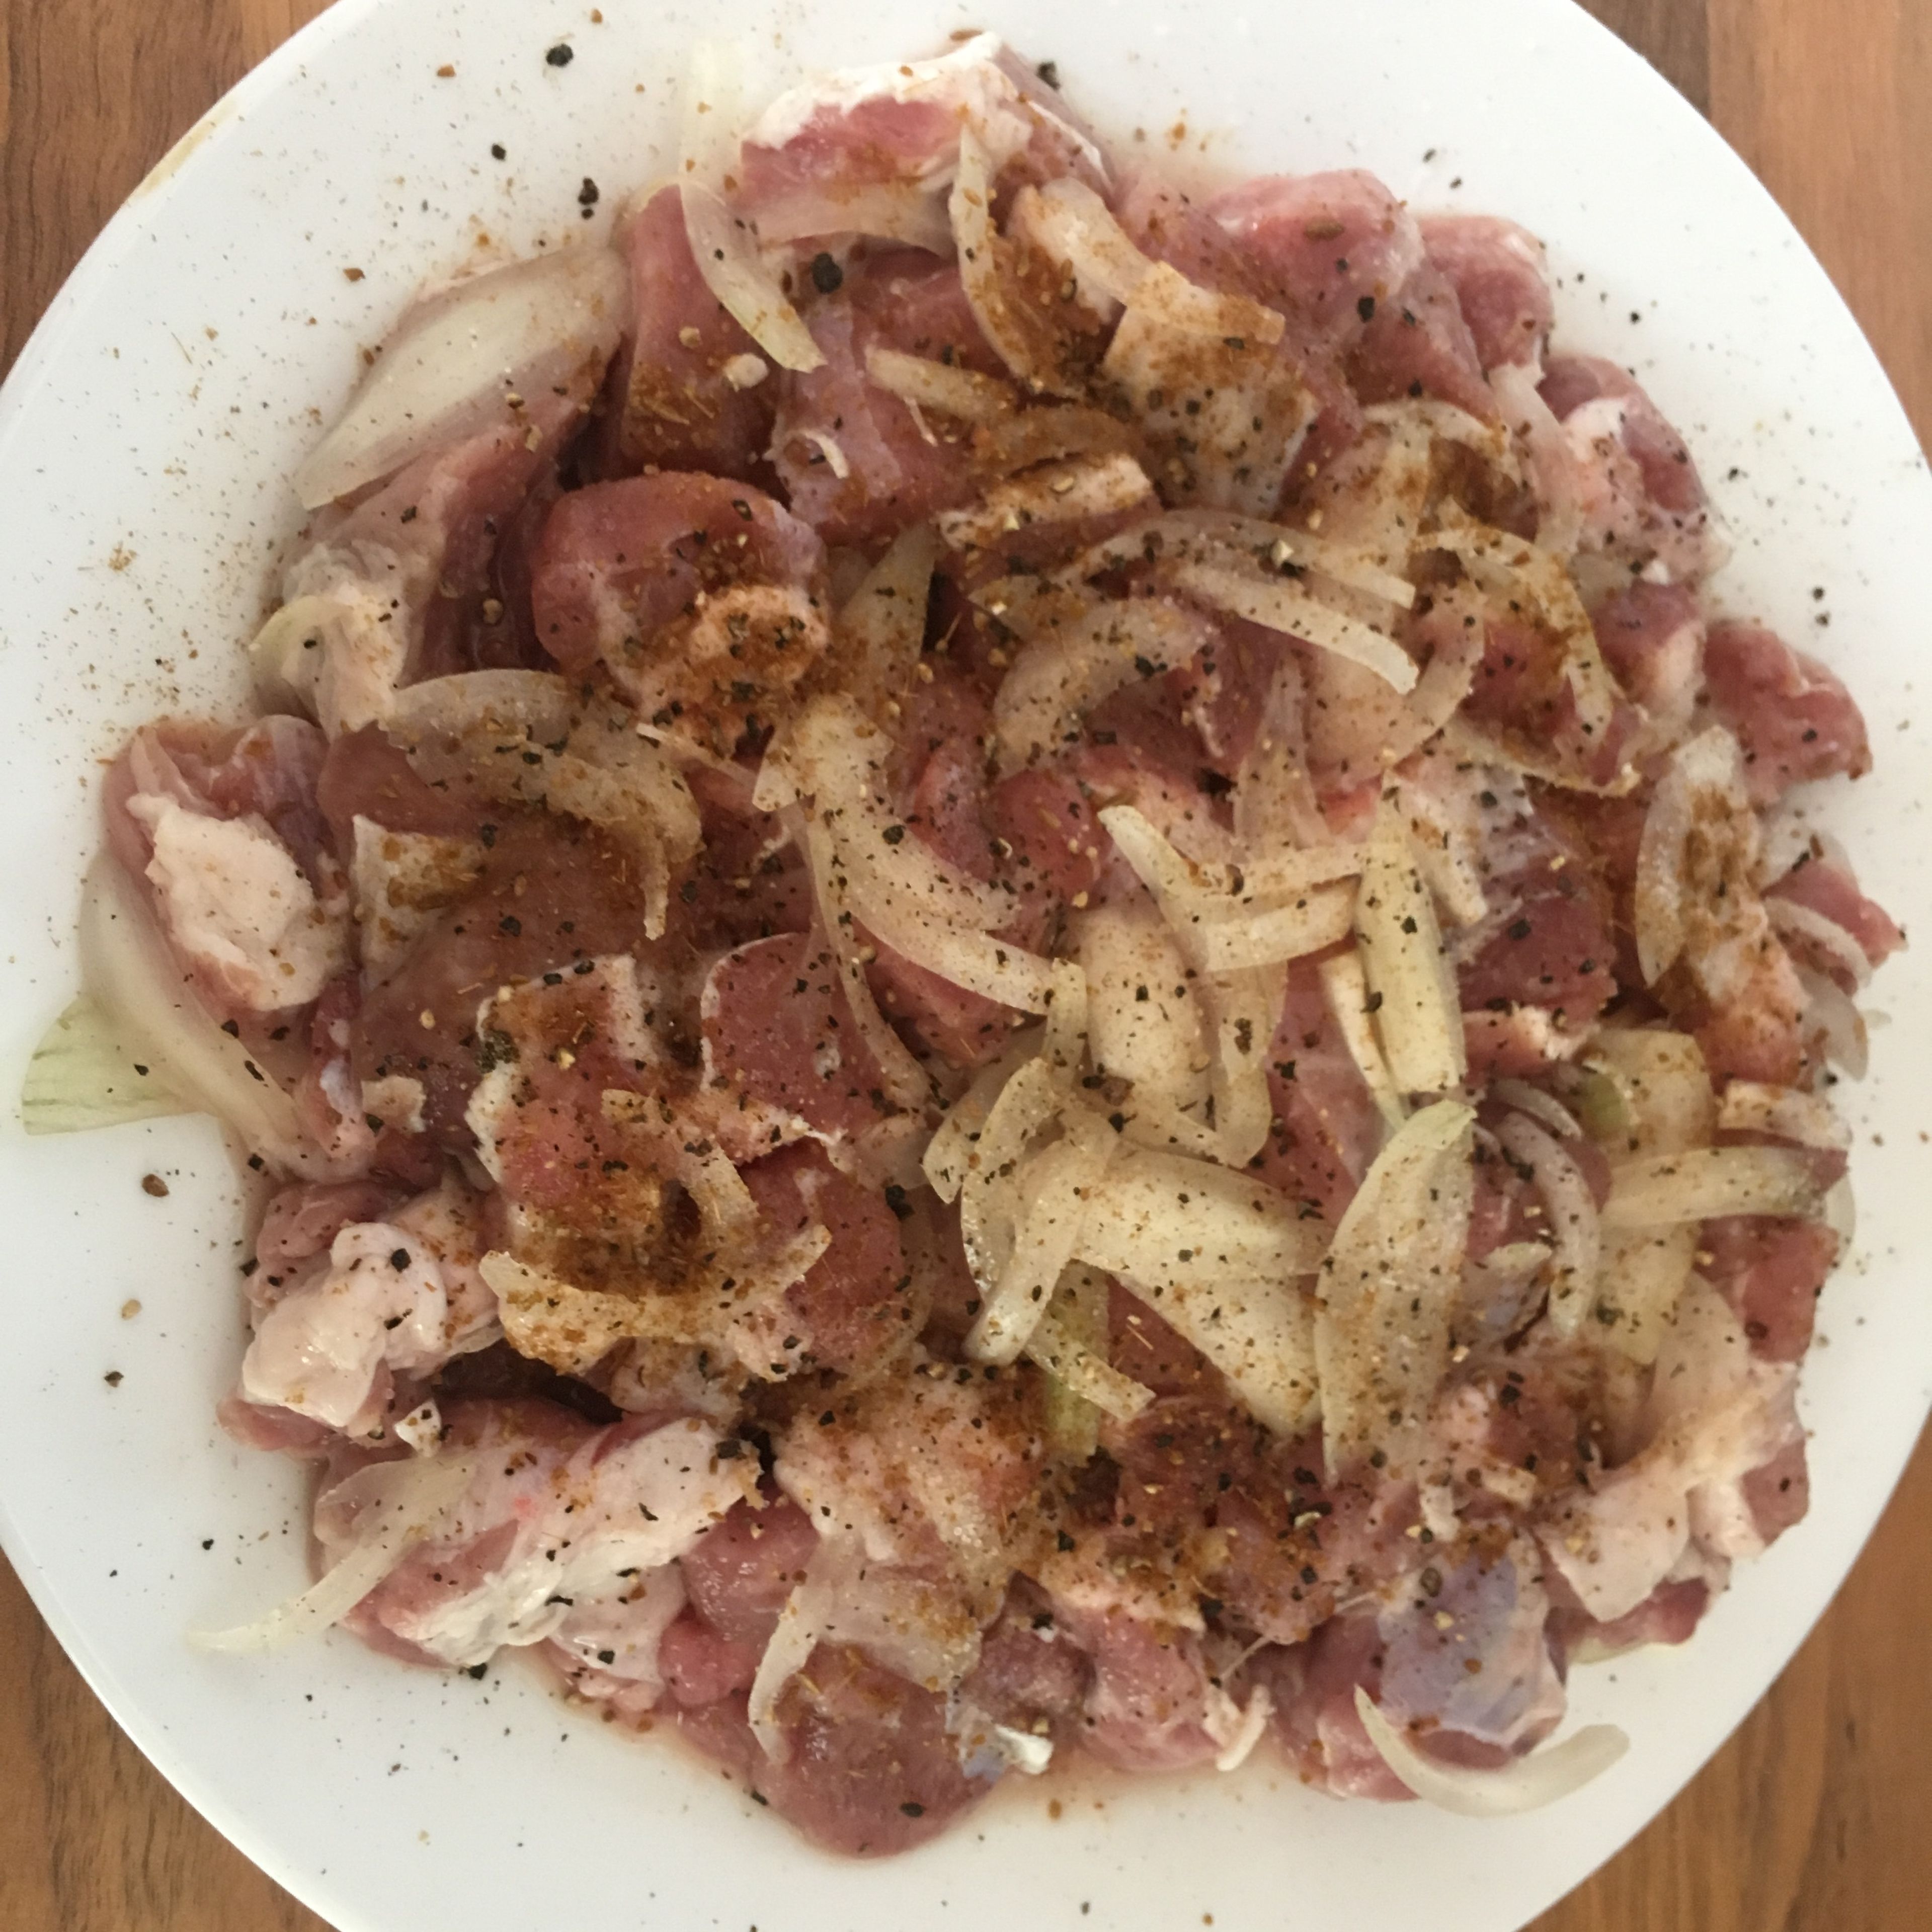 Marinade the lamb with onions, salt and pepper for two hours